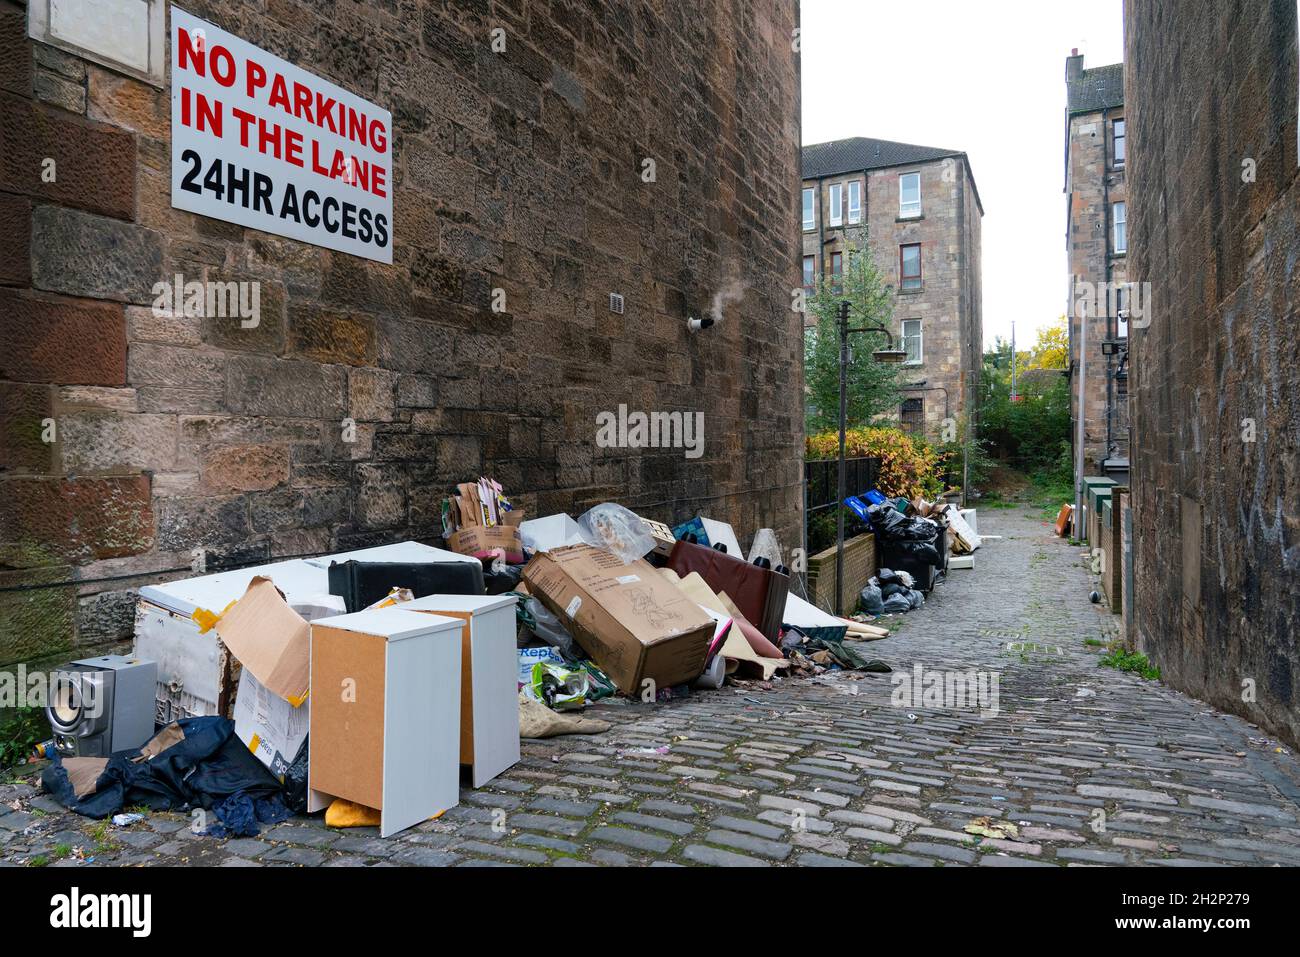 Glasgow, Scotland, UK. 23rd October 2021. Domestic waste is seen discarded in the streets of Govanhill in Glasgow with one week to the start of the UN Climate Change Conference COP26 in the city. City refuse collectors have said they will strike during the conference leading to fears that the city streets will be full of rubbish while in the world’s spotlight.  Iain Masterton/Alamy Live News. Stock Photo